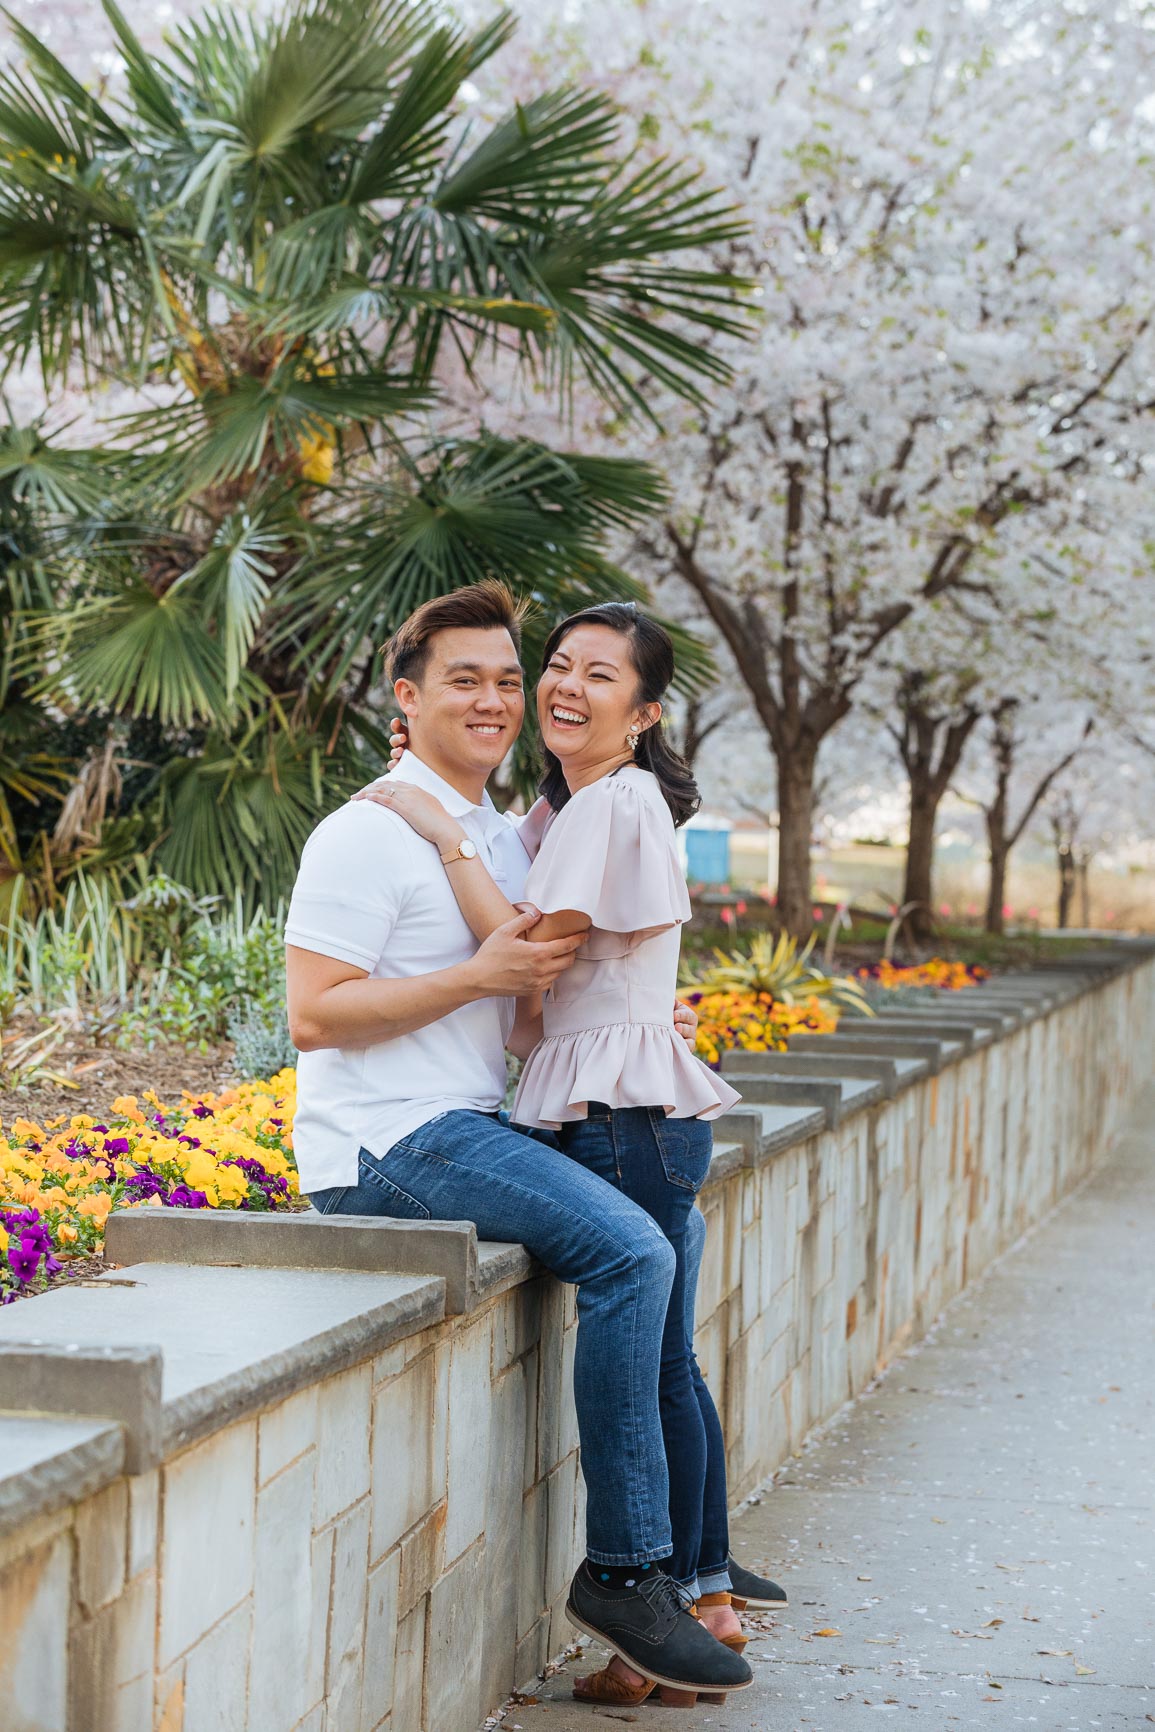 Uptown Charlotte engagement session photographed by nhieu tang photography | nhieutang.com